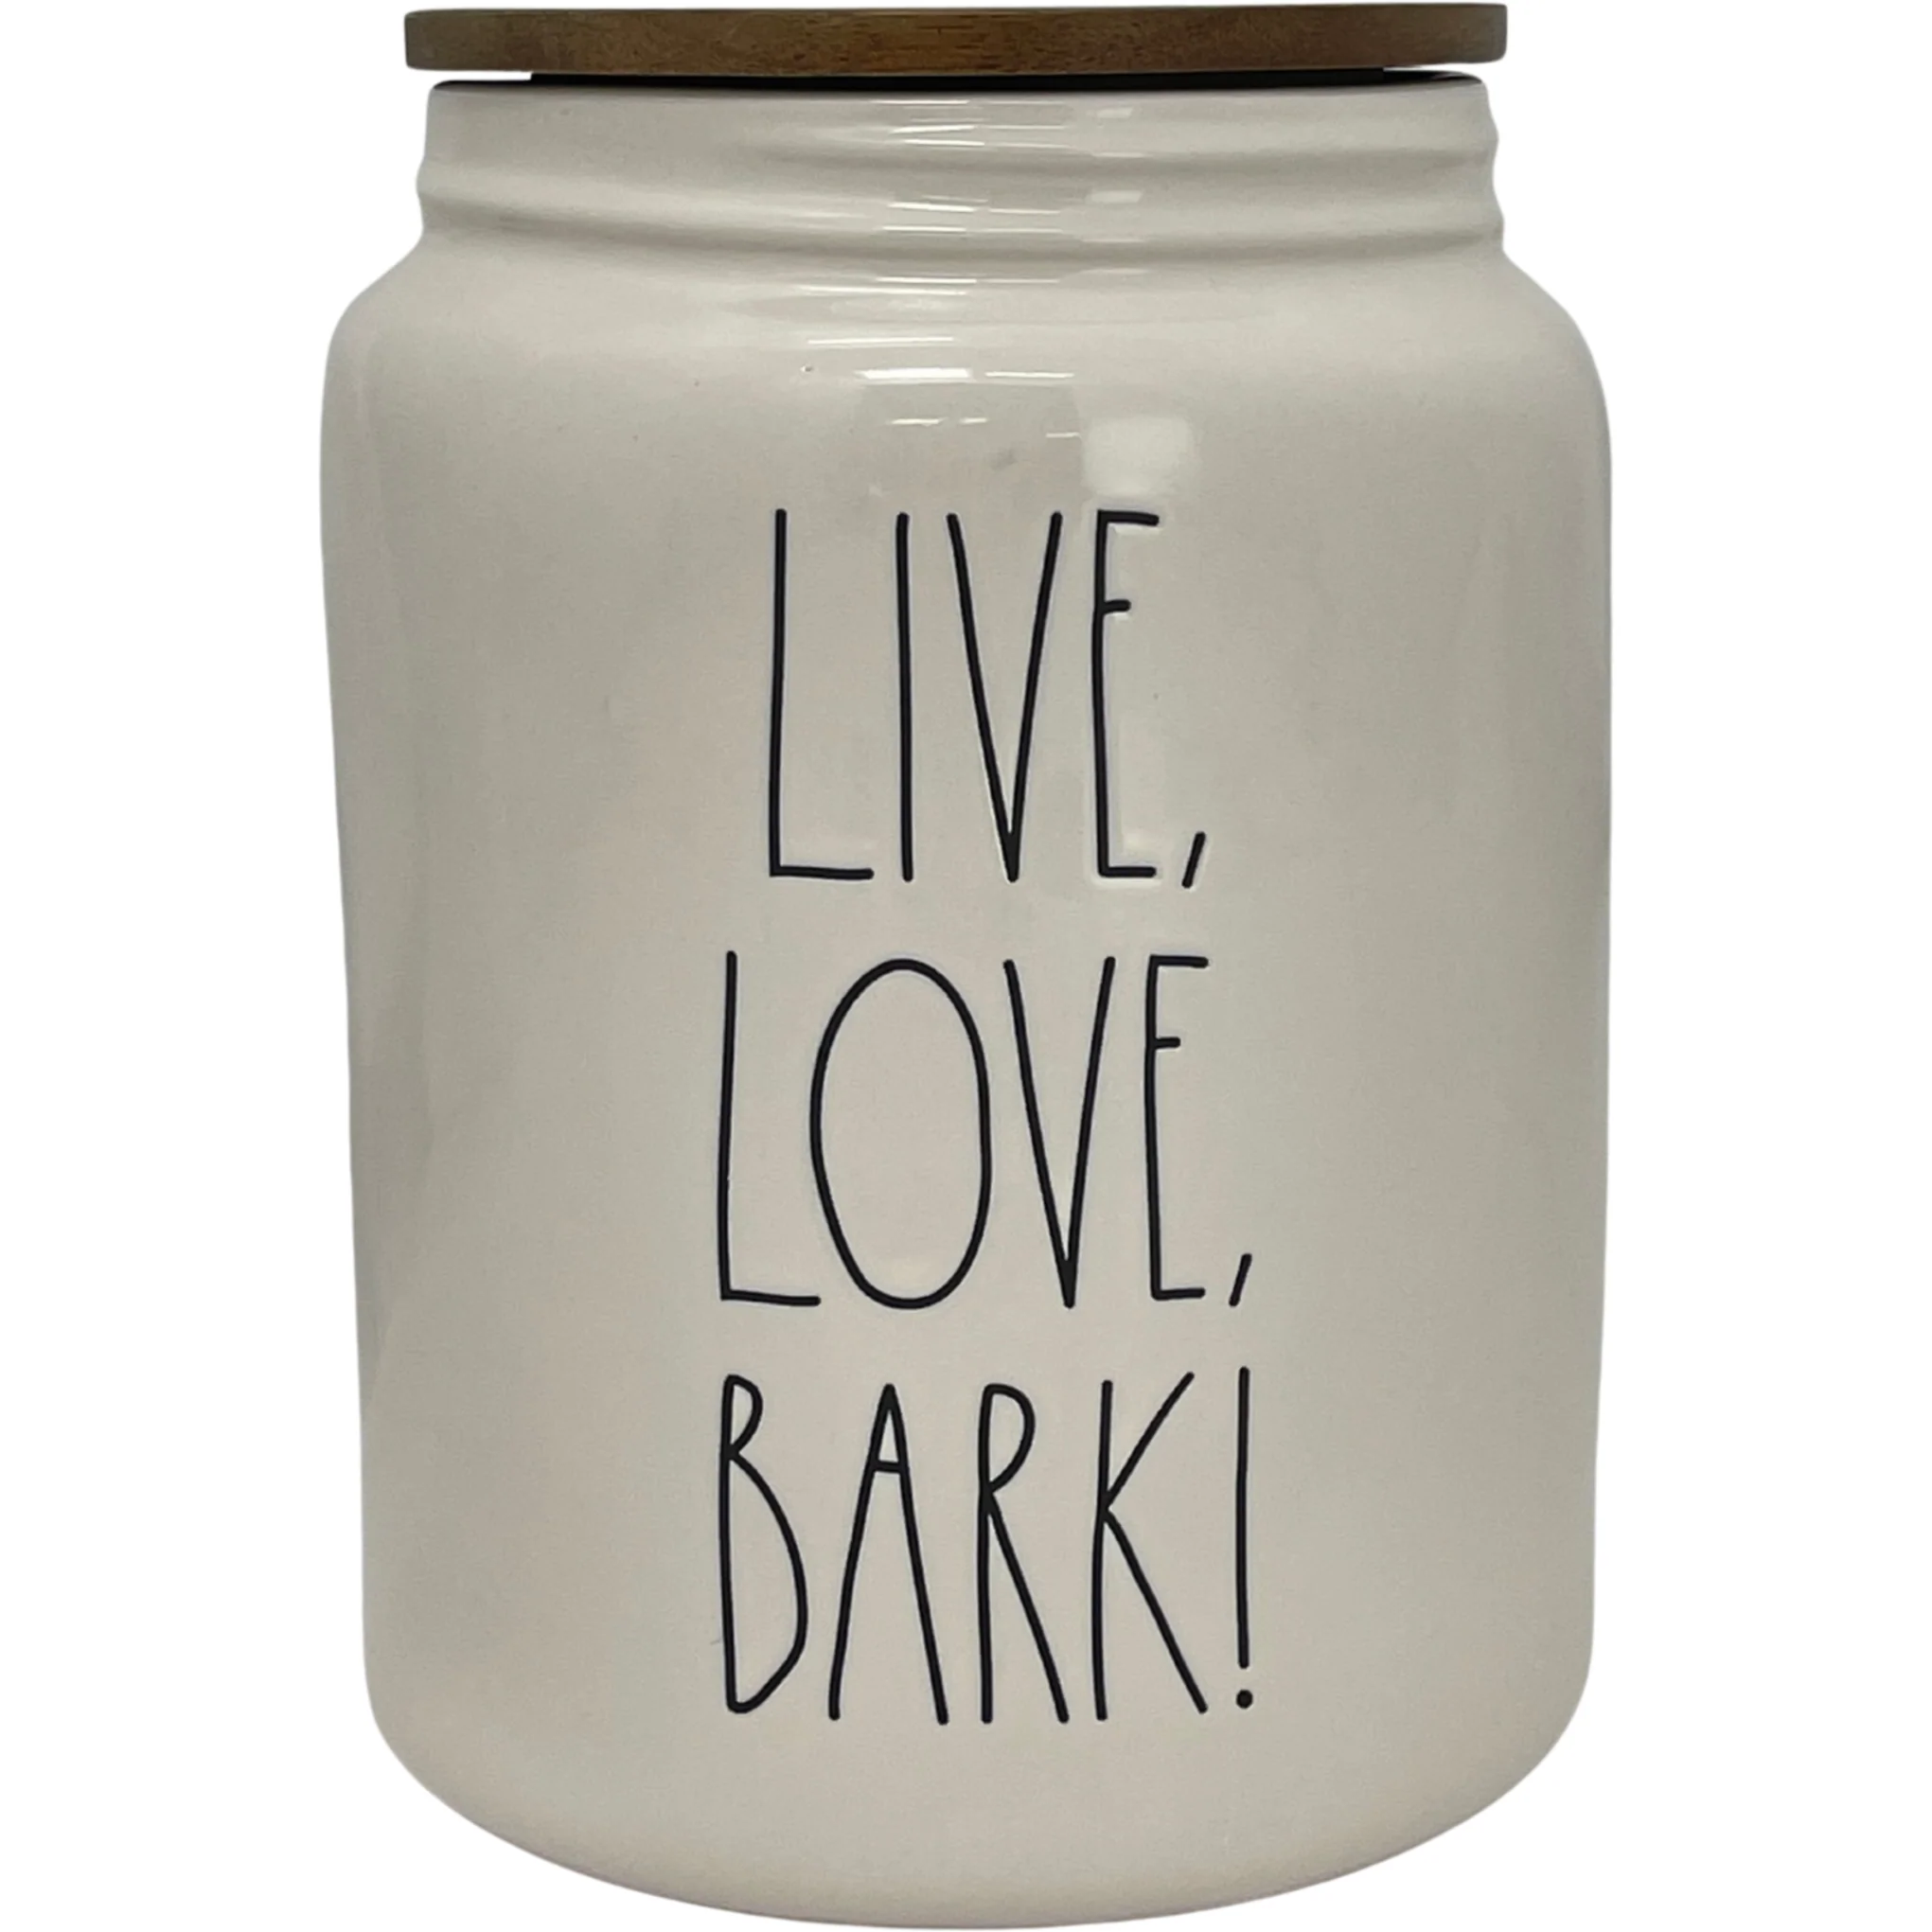 Rae Dunn Pet Treat Jar "Live, Love, Bark" / White / Ceramic / Treat Canister with Lid